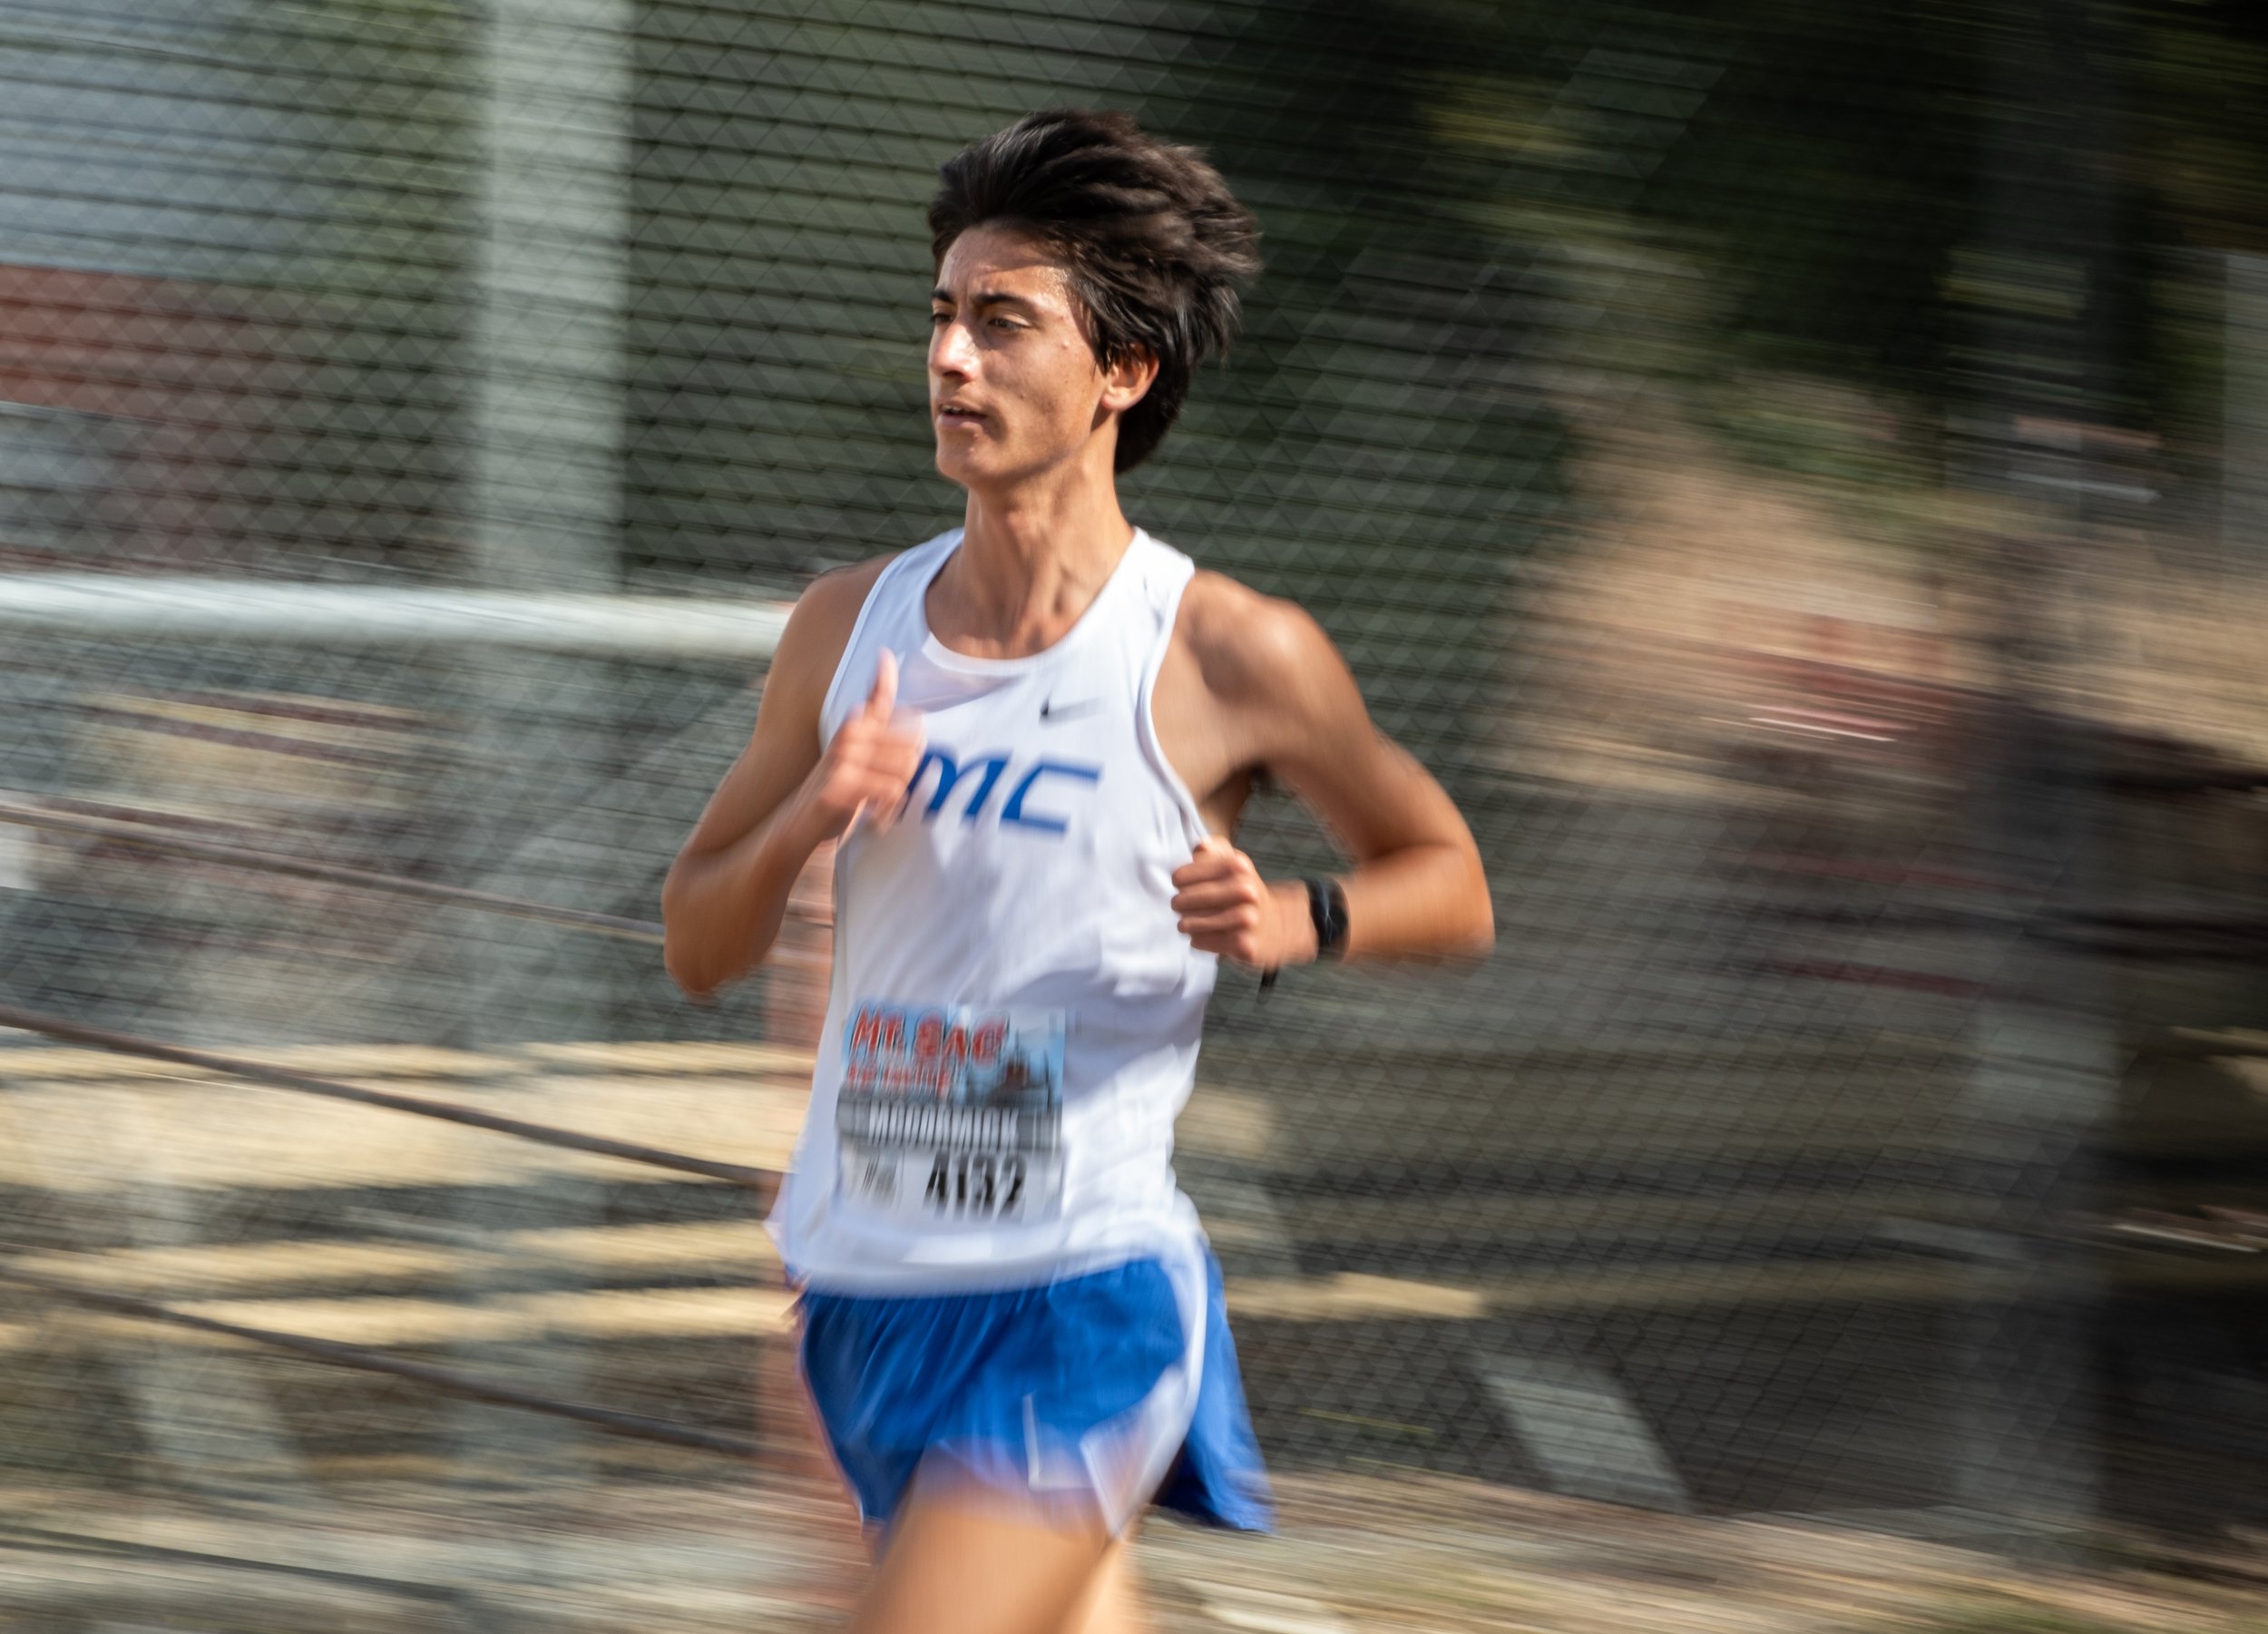  Colin McCormick running his third mile at MT. SAC Cross Country Invitational on Friday, Oct 13 at MT. SAC in Walnut, Calif. (Danilo Perez | The Corsair) 